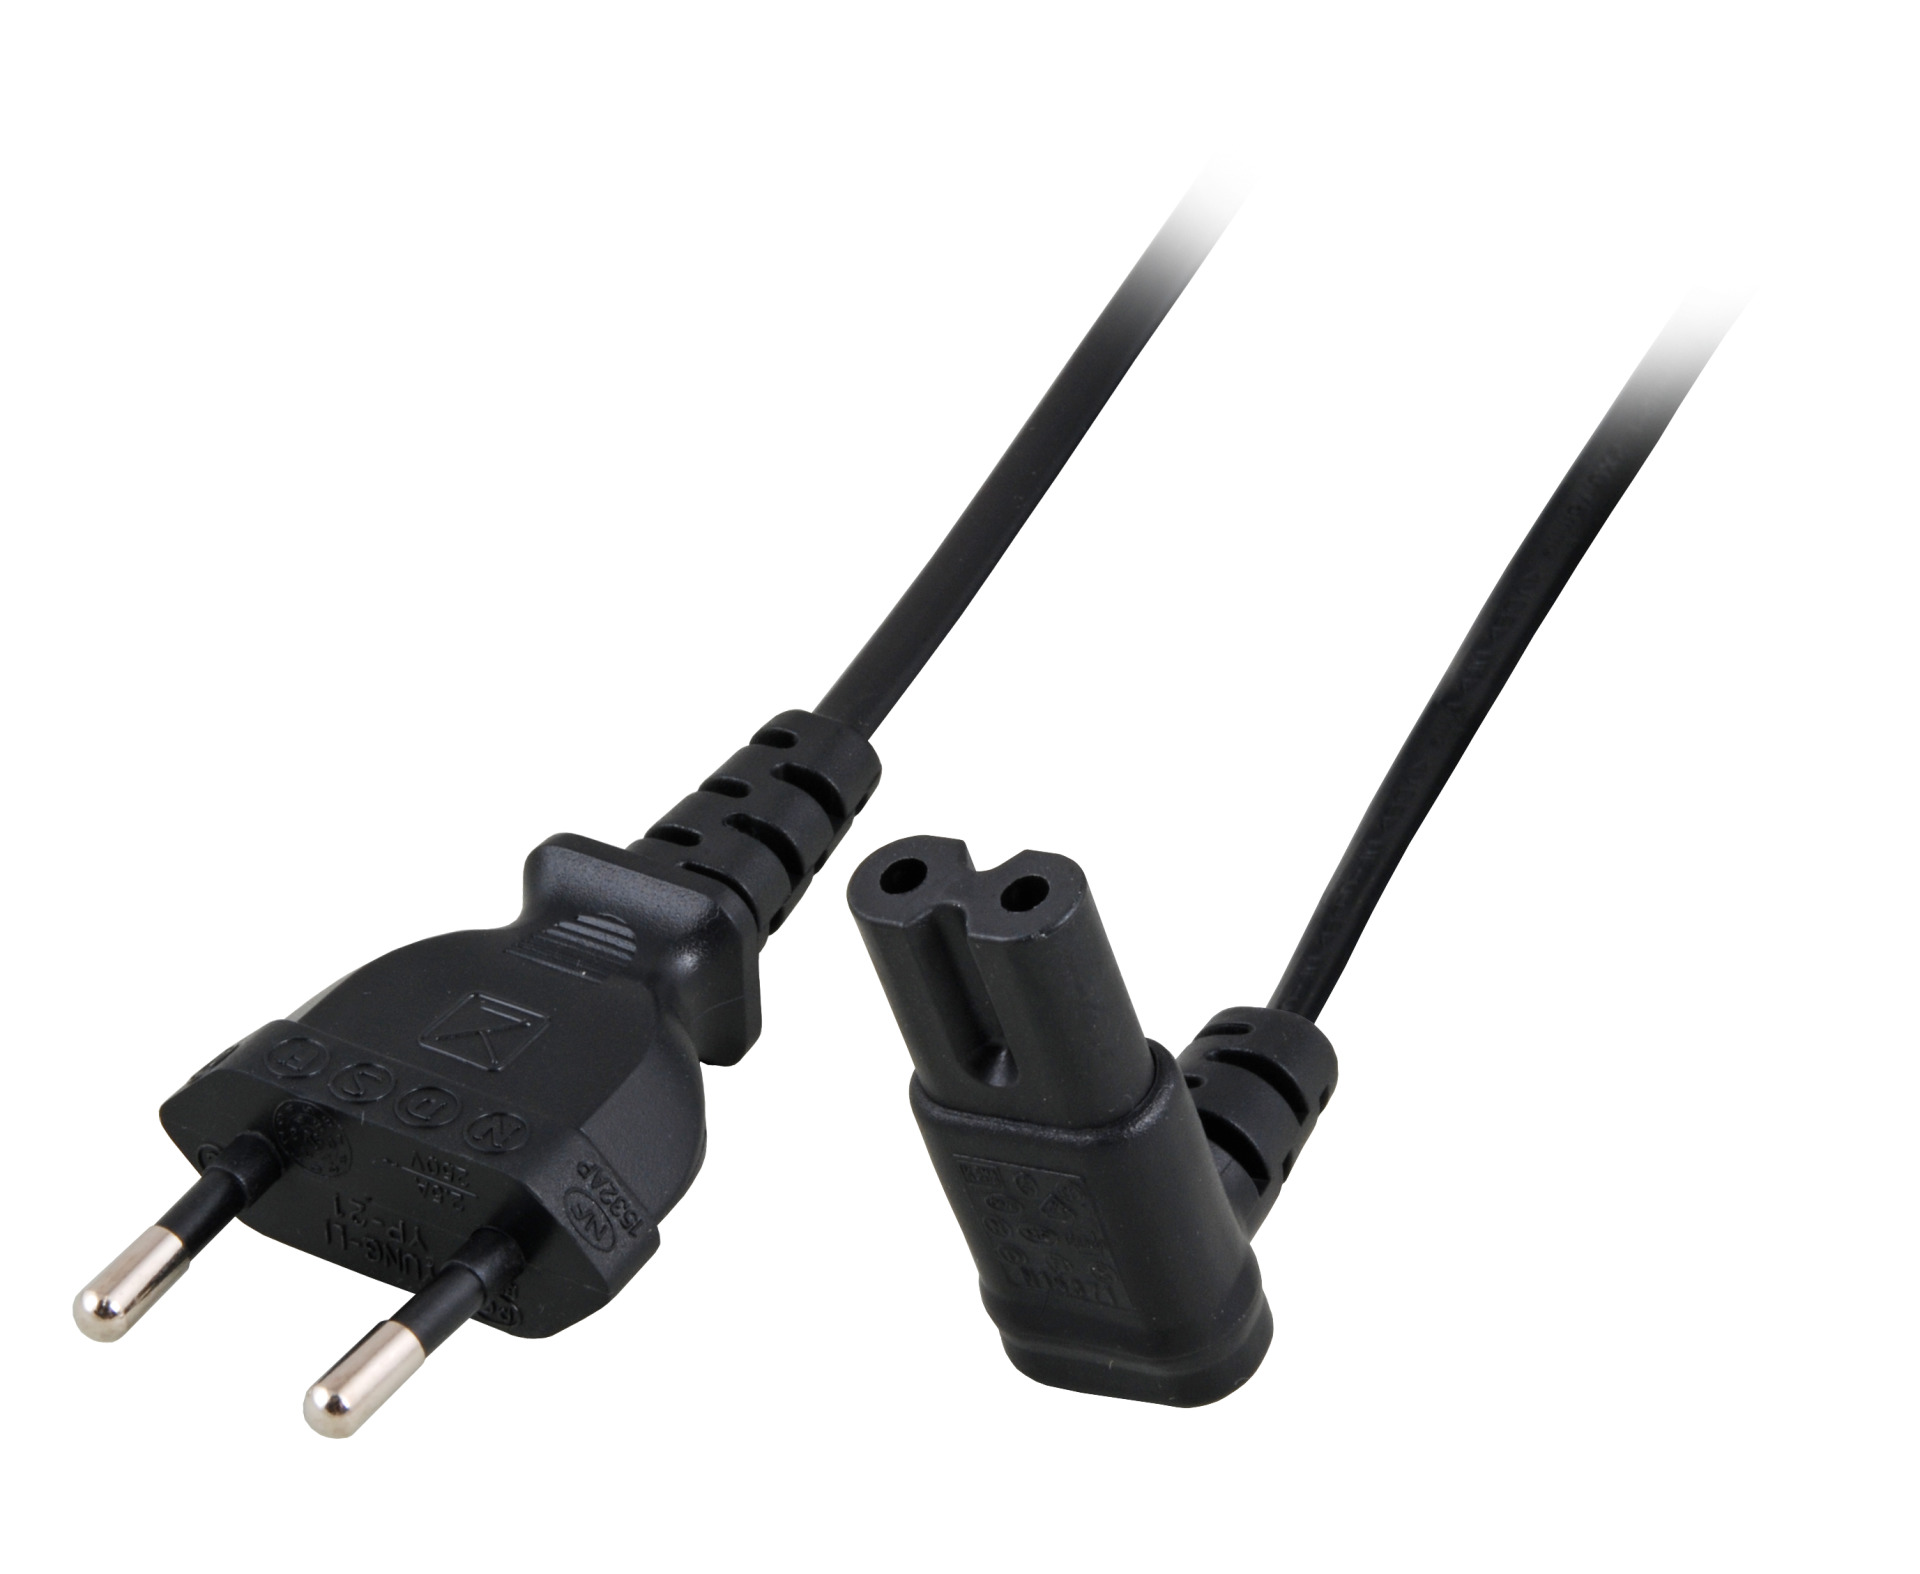 Power Cable Euro - C7 90° Up/Down, Black, 2.0 m, 2 x 0.75 mm²